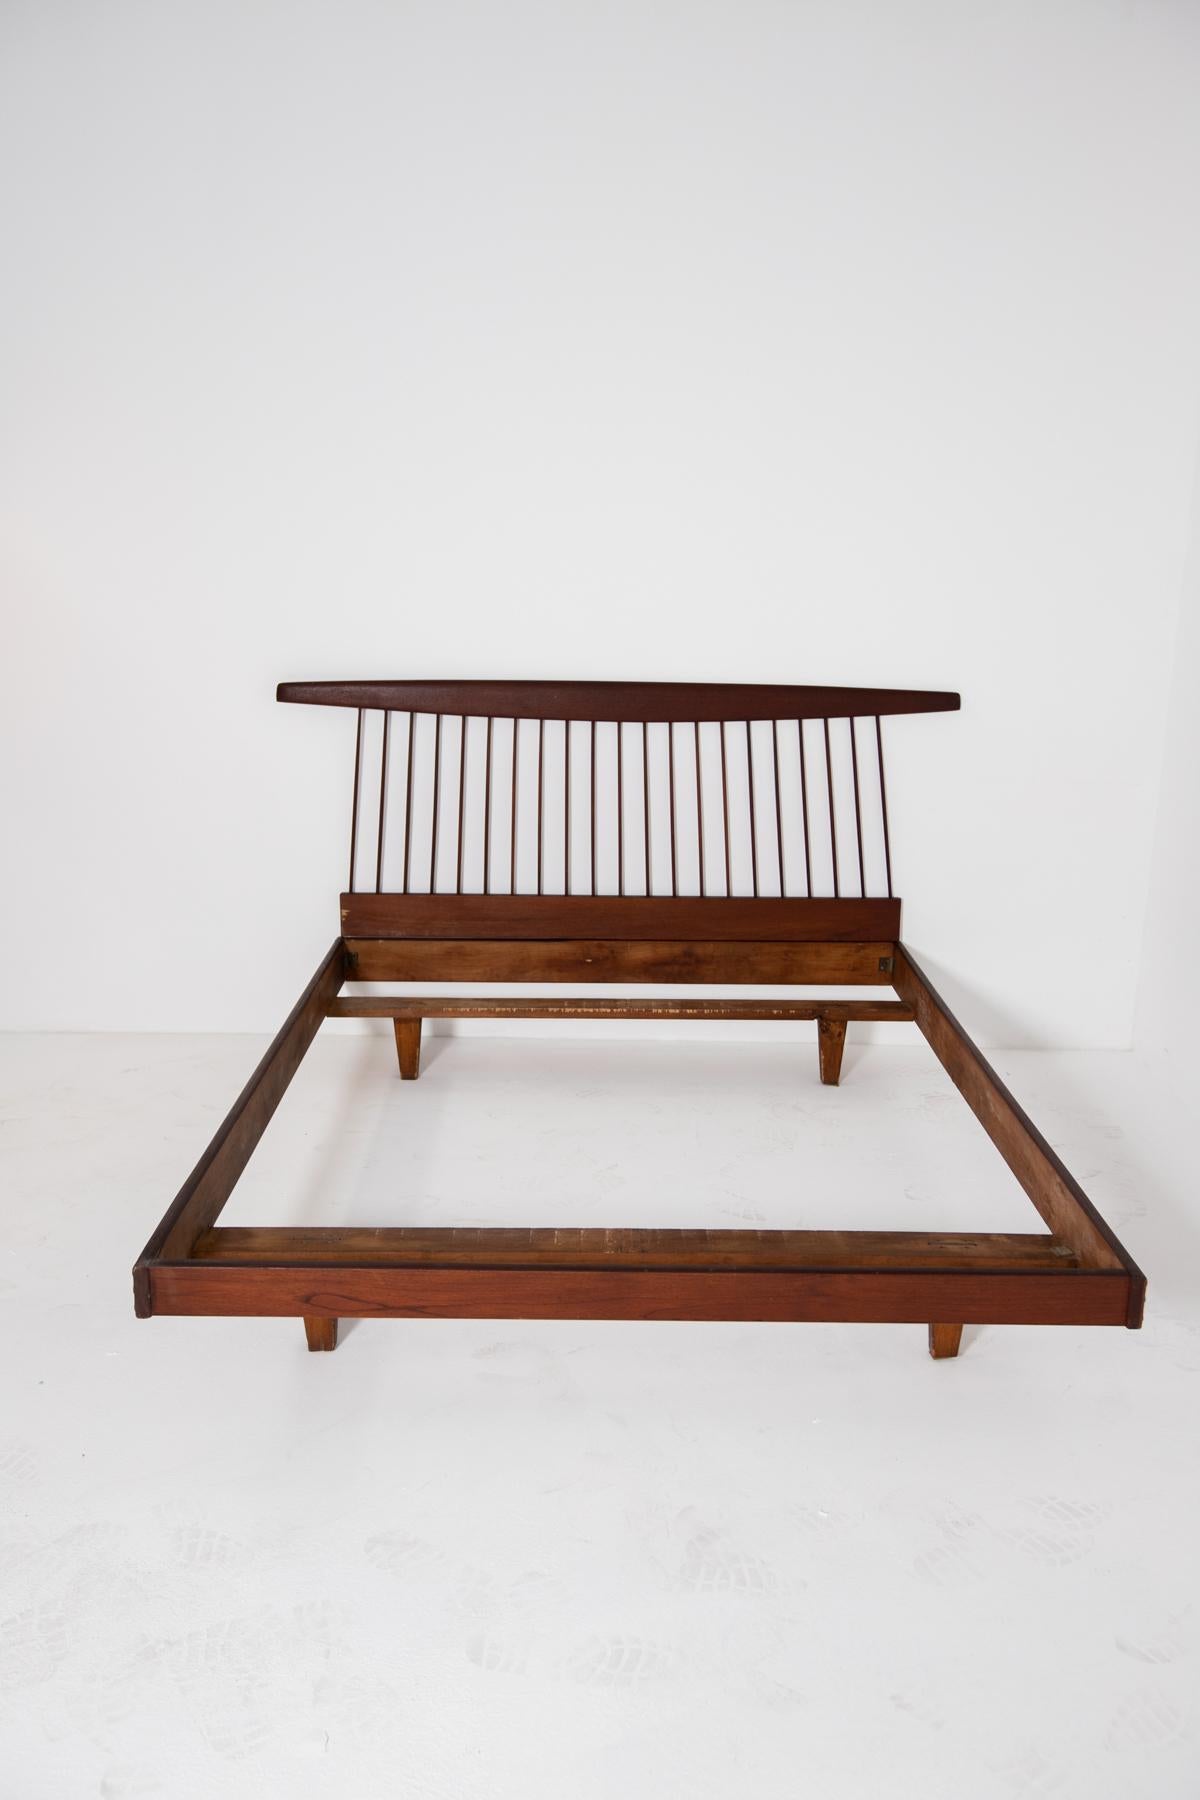 George Nakashima's walnut bedroom bed or futon from the 1950s. The bed is made entirely of walnut and is a marvellous work of essential design with clean, rigorous lines. The bed is made of wooden sheets assembled together with wooden bolts. Its